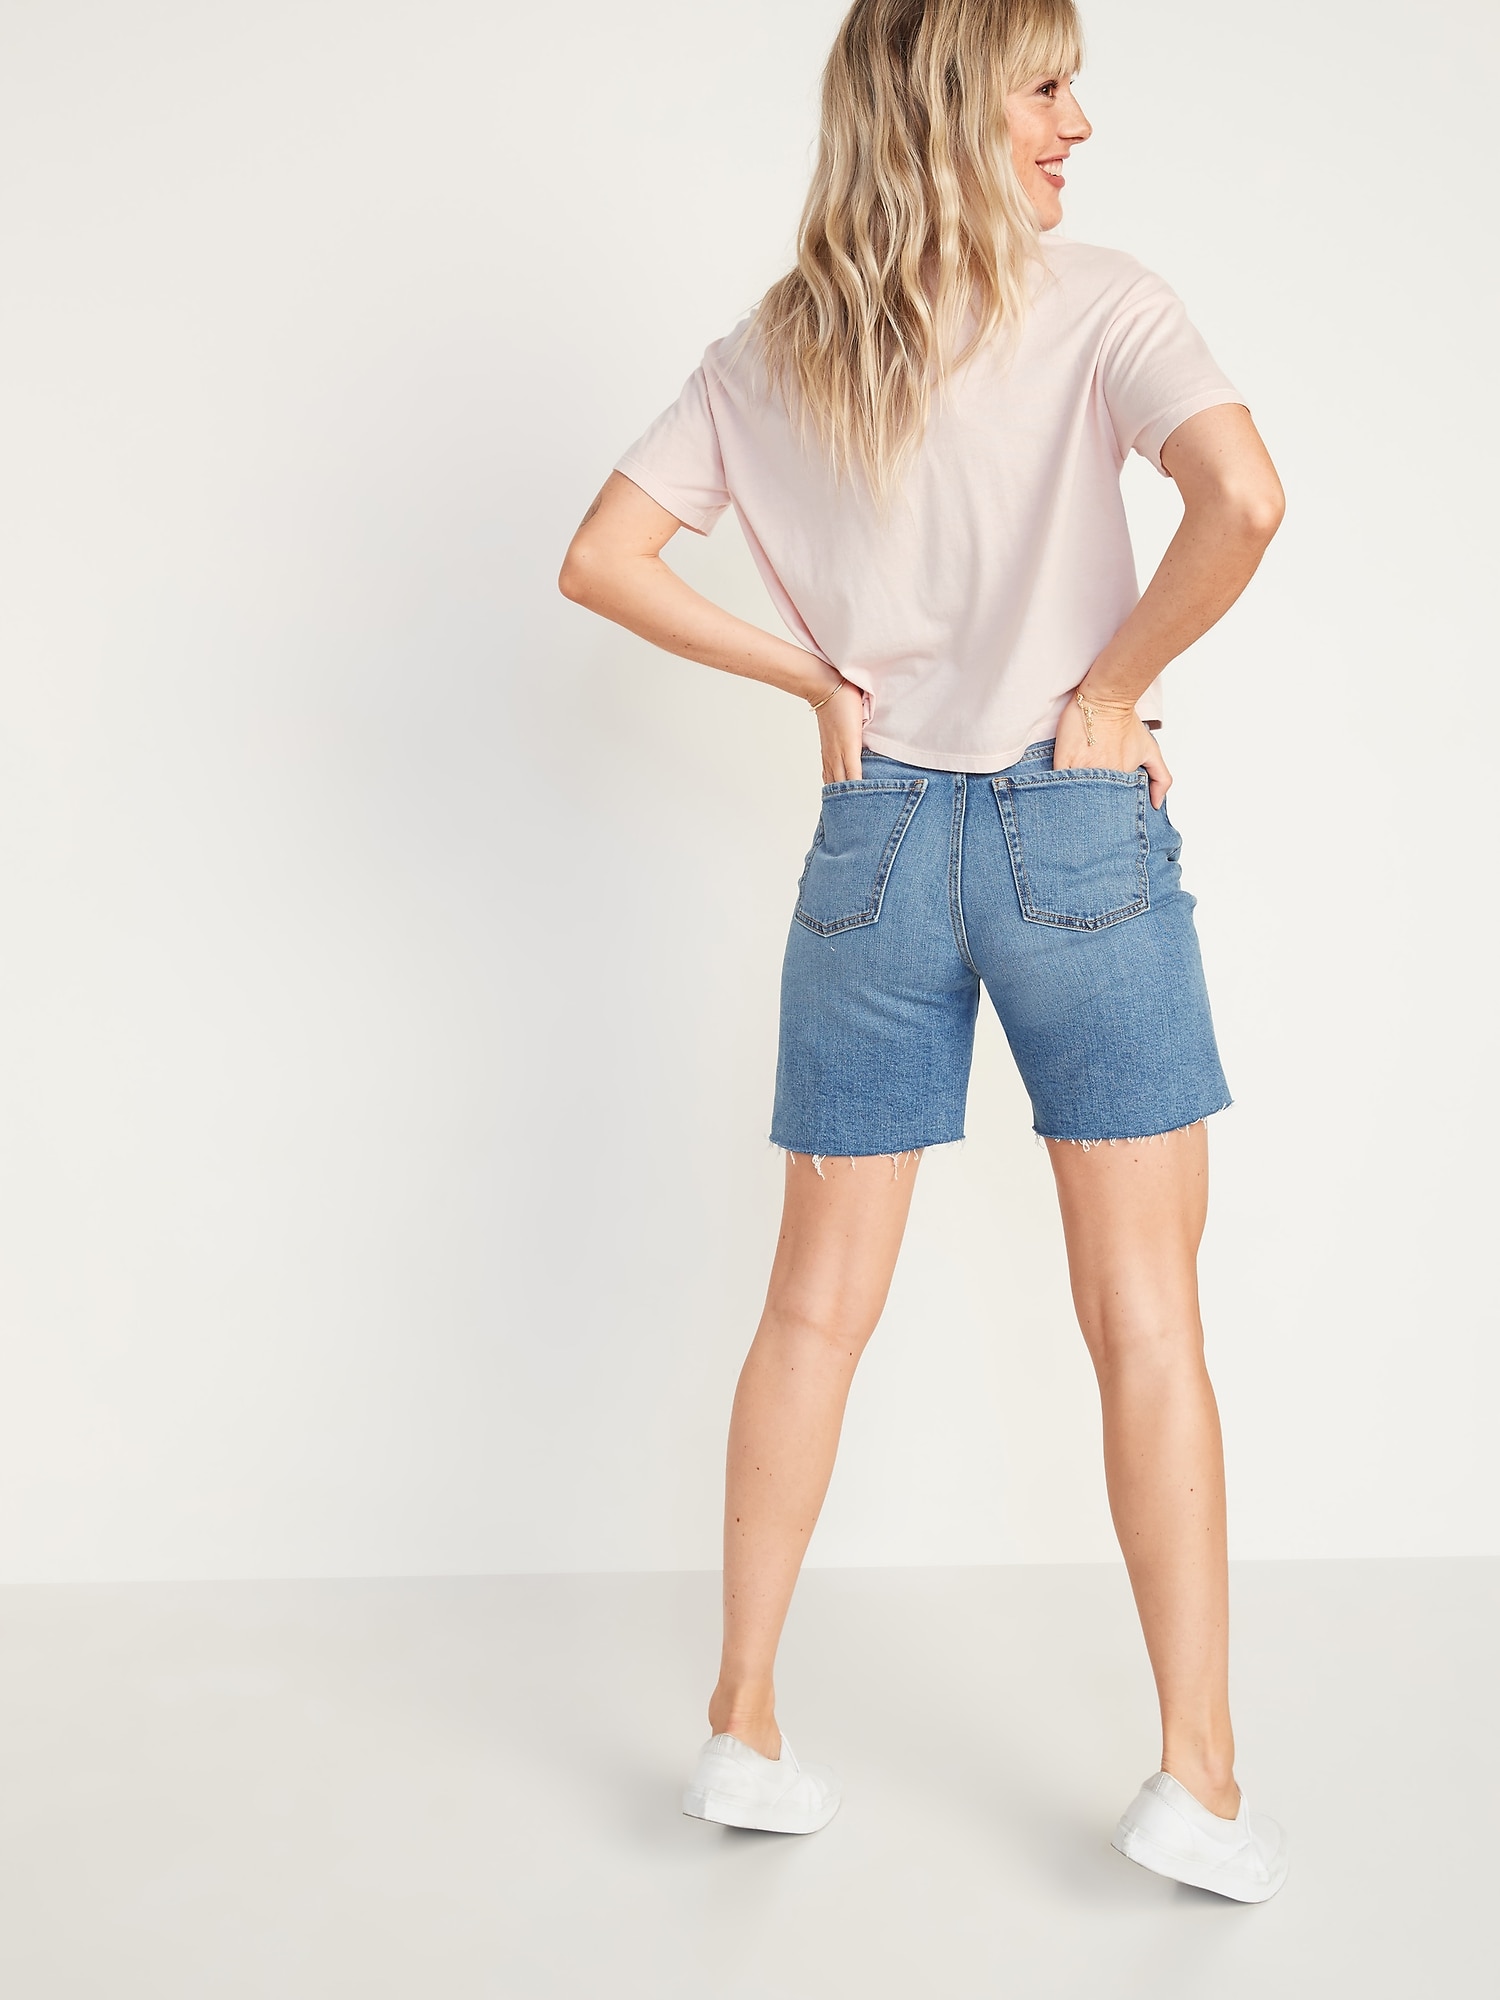 Extra High-Waisted Sky-Hi Button-Fly Ripped Jean Shorts for Women